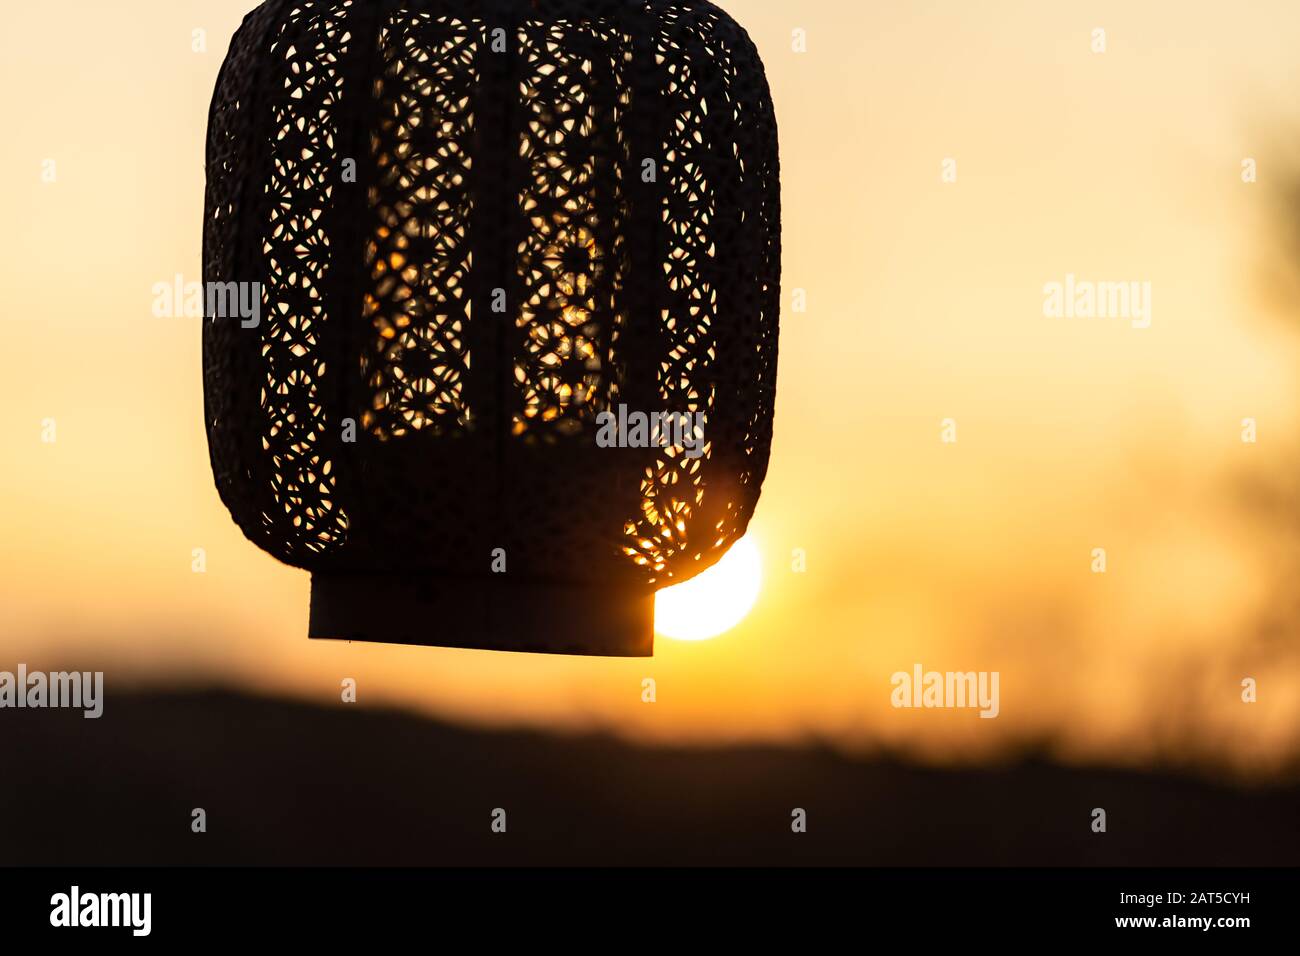 hand holding oriental lantern with candle while sunset. Sun is shining through the lamp. Stock Photo